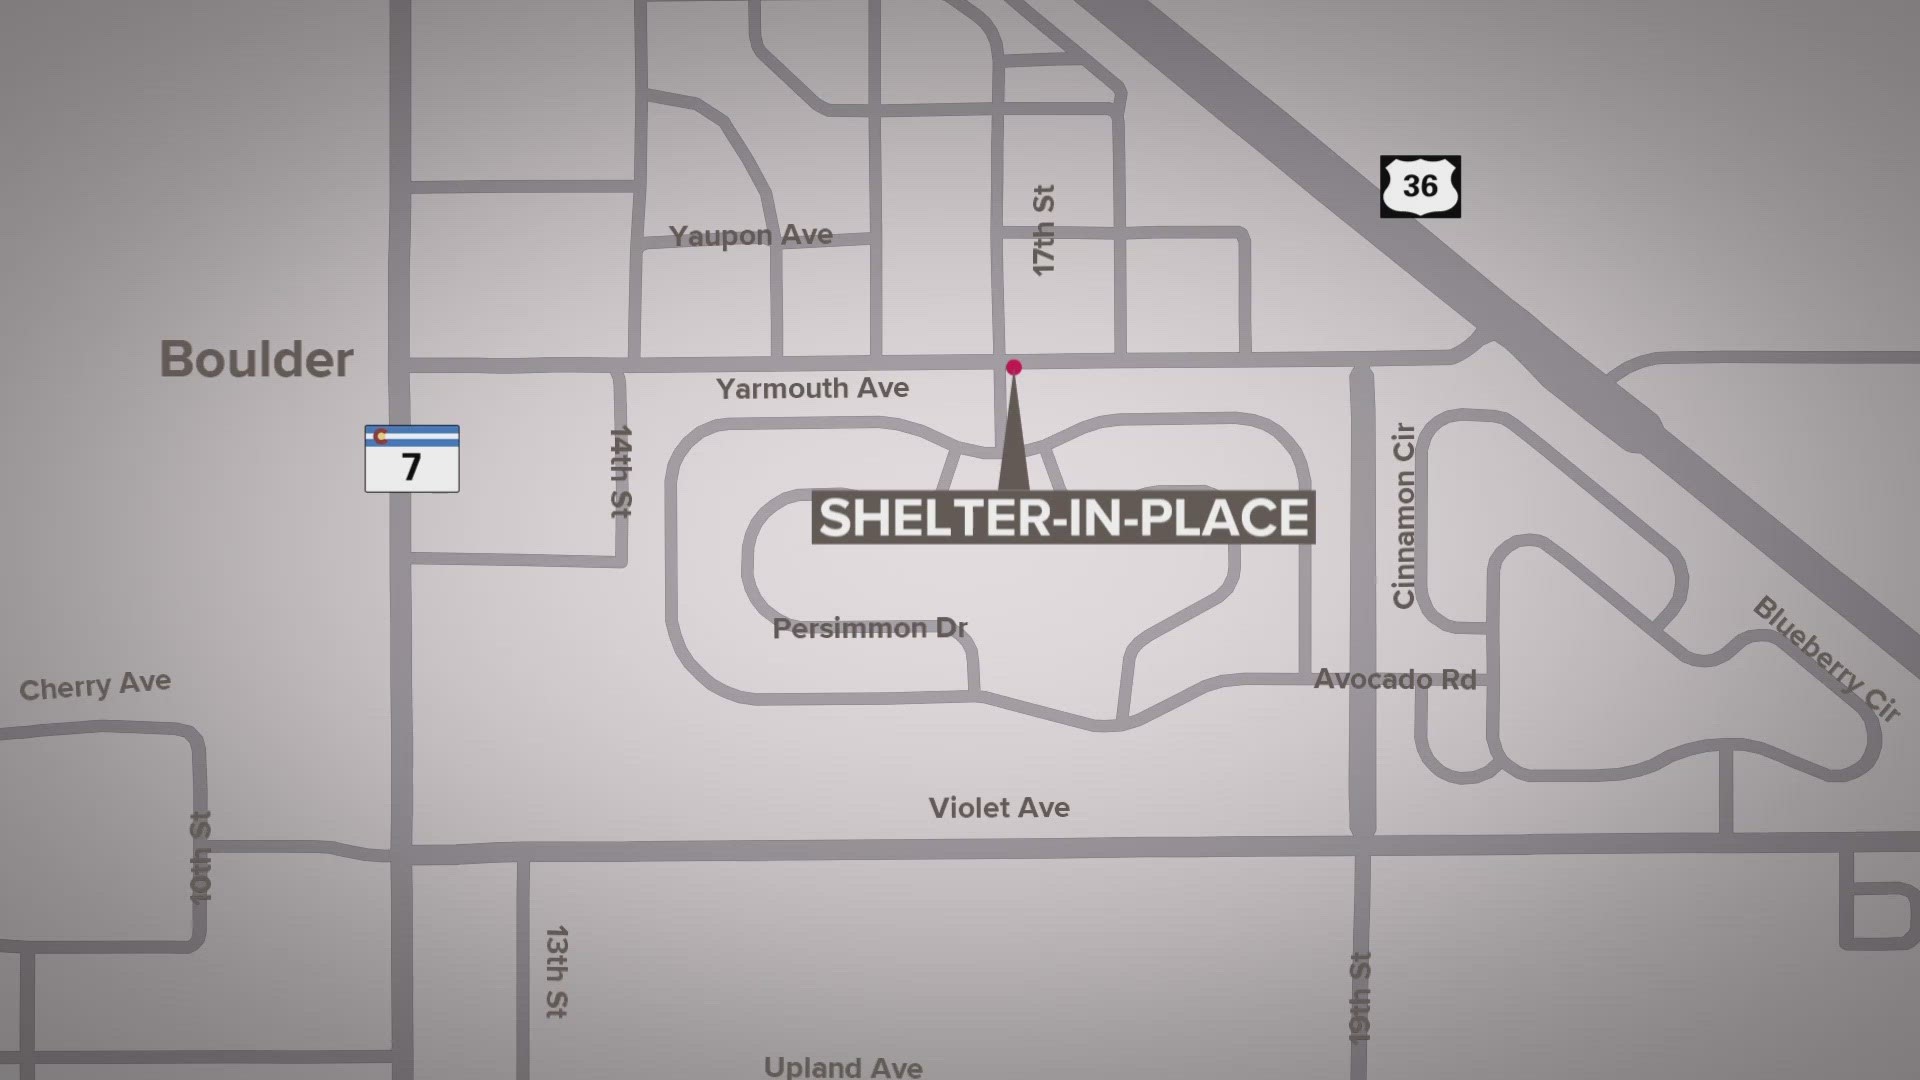 A shelter-in-place has been issued by police in the area of 17th Street and Yarmouth Avenue on Tuesday morning.